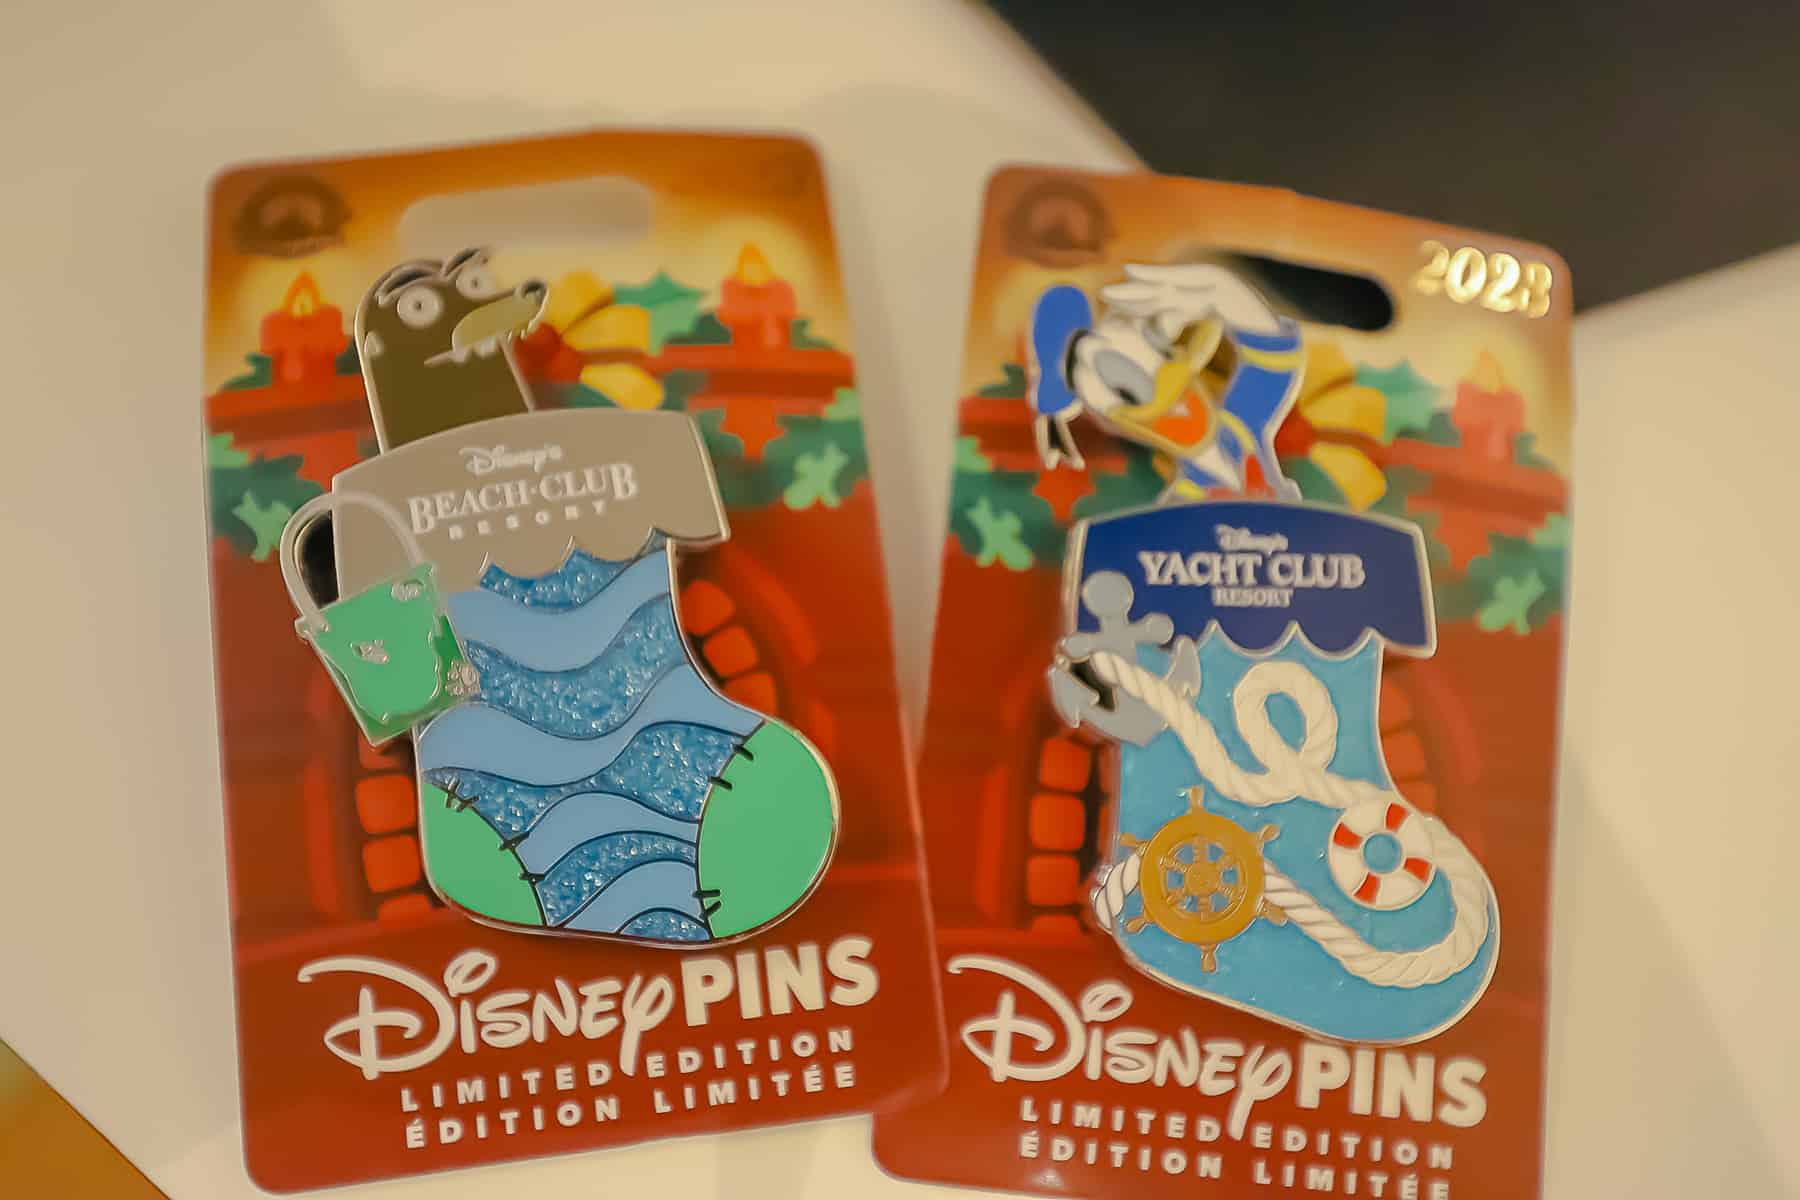 Stocking pins with Donald Duck for the Yacht Club Resort